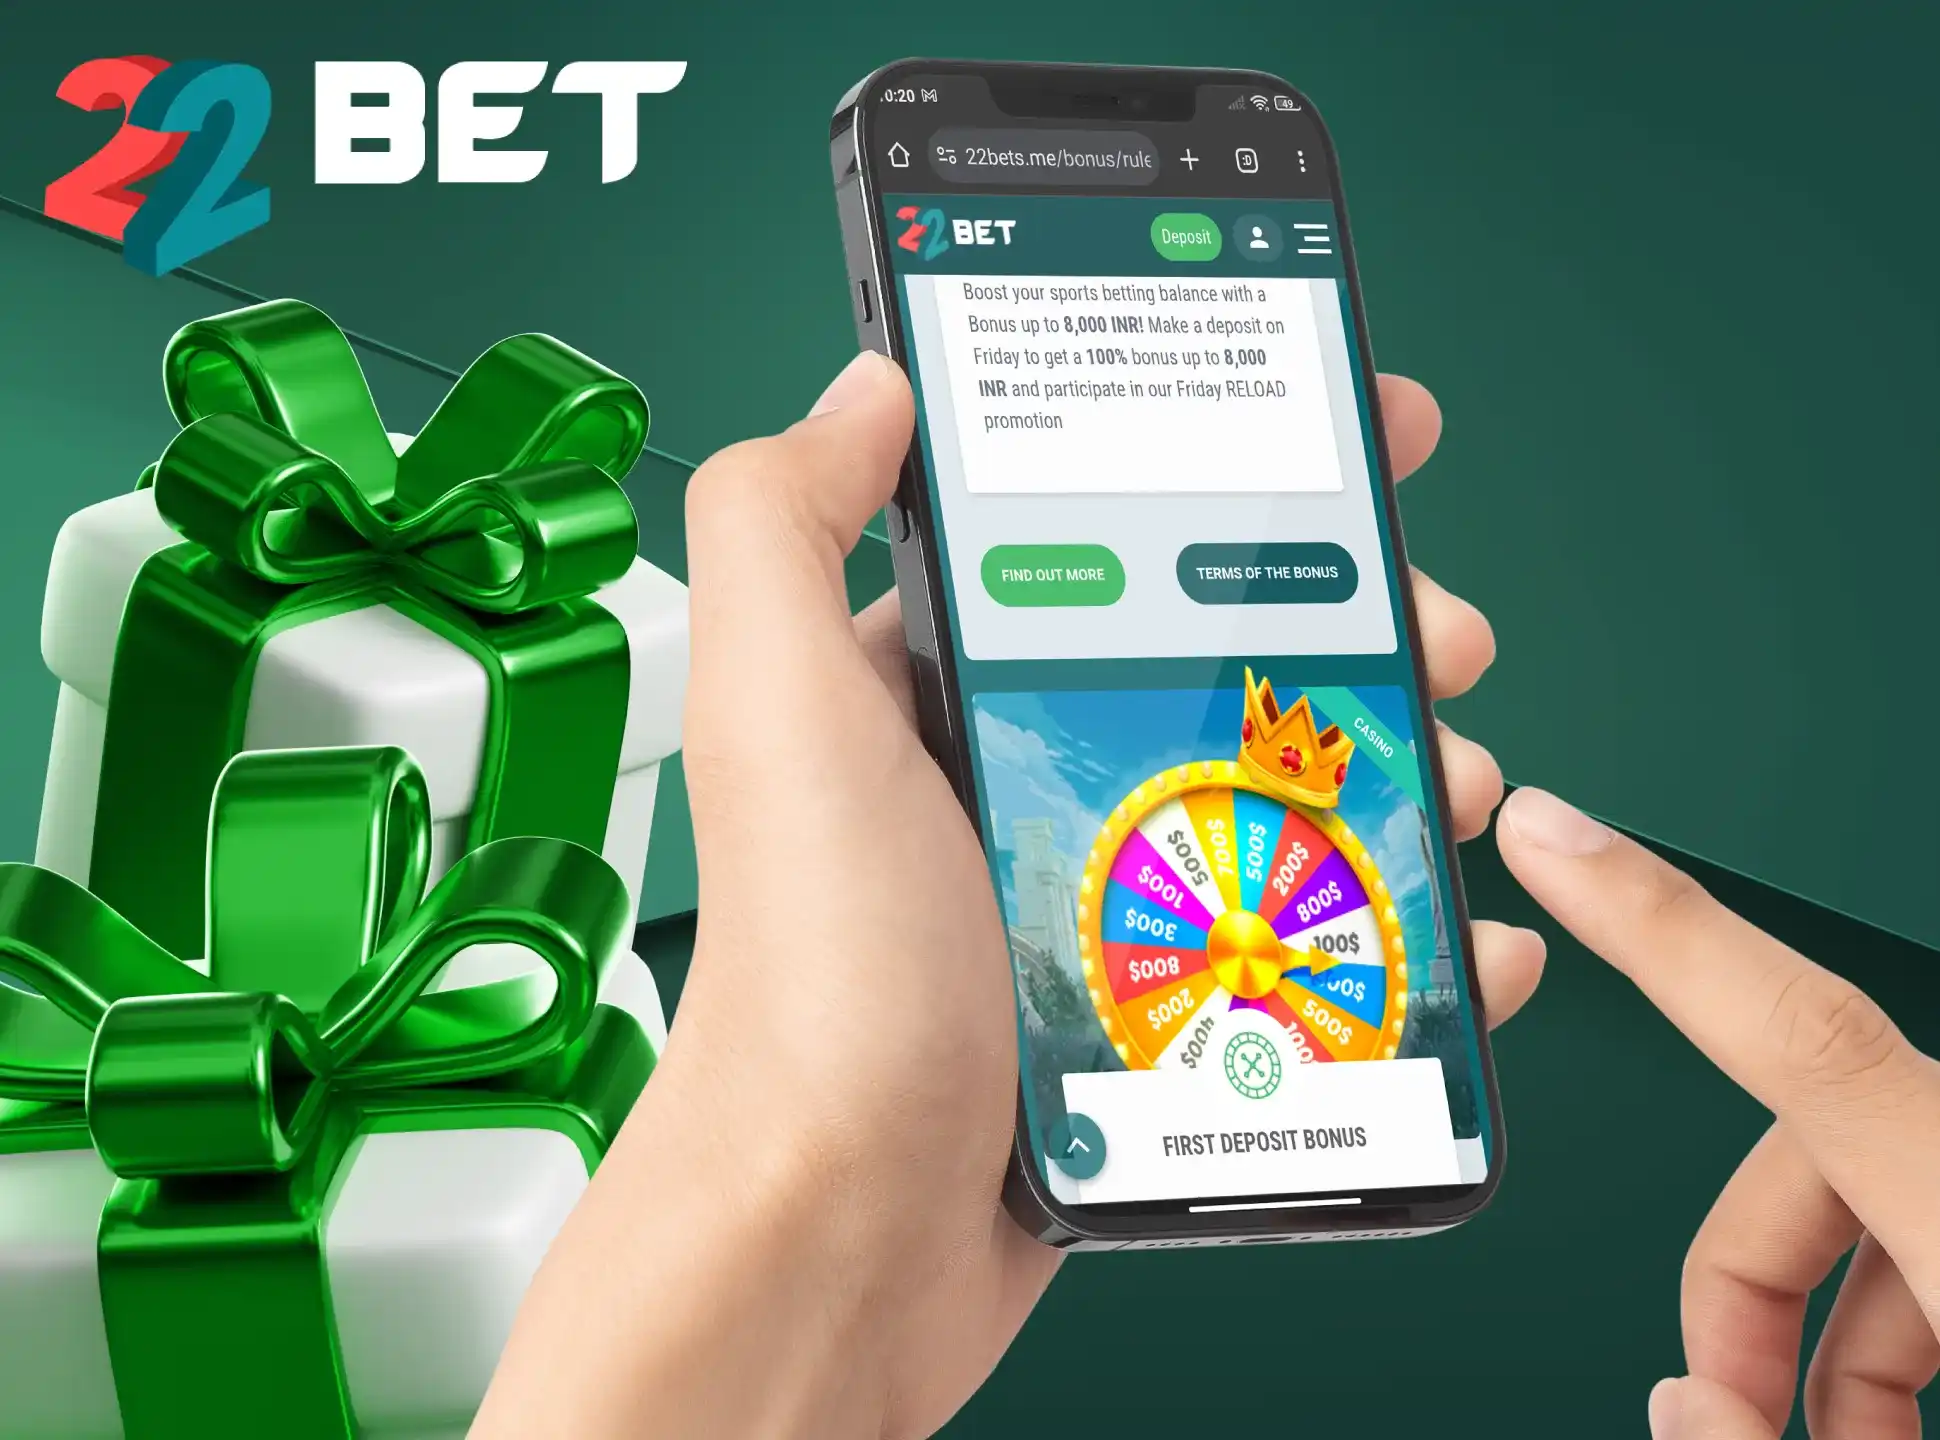 In the 22Bet app you'll find welcome bonuses and lots of promotions.